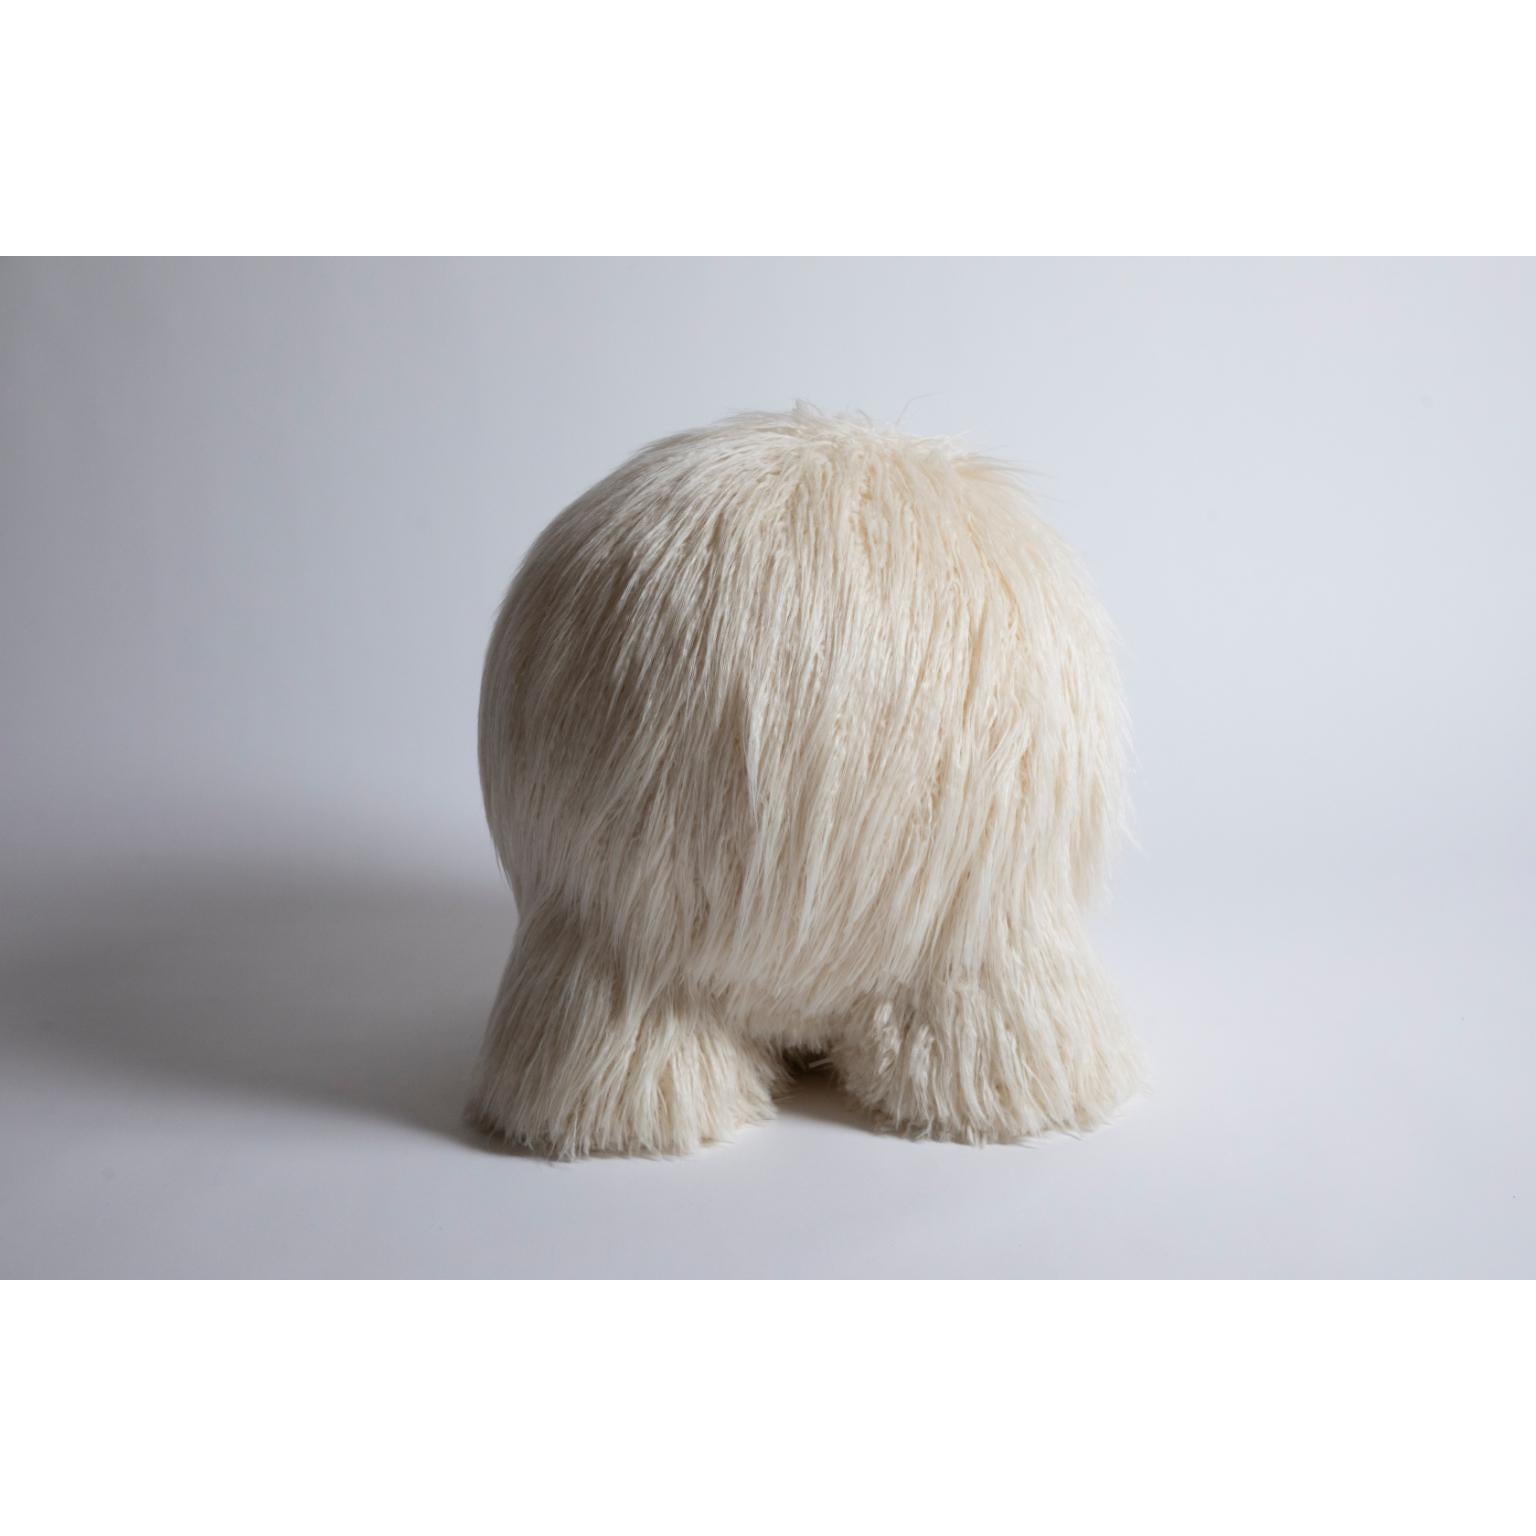 Fur Atlas stool by Pietro Franceschini
Sold exclusively by Galerie Philia
Manufacturer: Stefano Minotti
Dimensions: W 49 x H 52 cm
Materials: Fur
Available materials: Lamb/bouclé, gold leaf/cast brass

Pietro Franceschini is an architect and